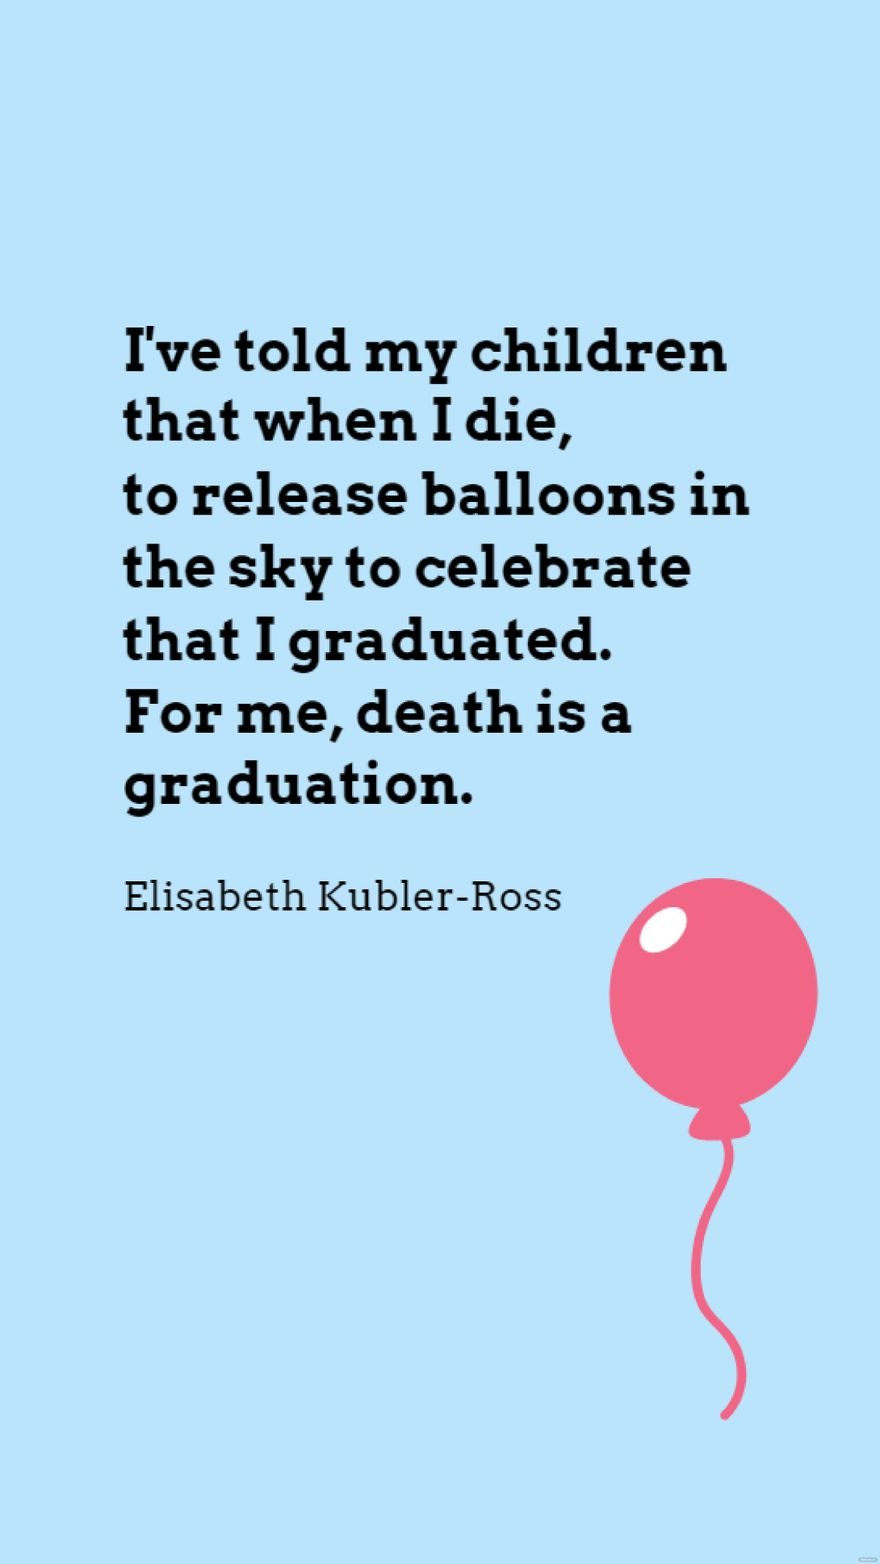 Free Elisabeth Kubler-Ross - I've told my children that when I die, to release balloons in the sky to celebrate that I graduated. For me, death is a graduation. in JPG